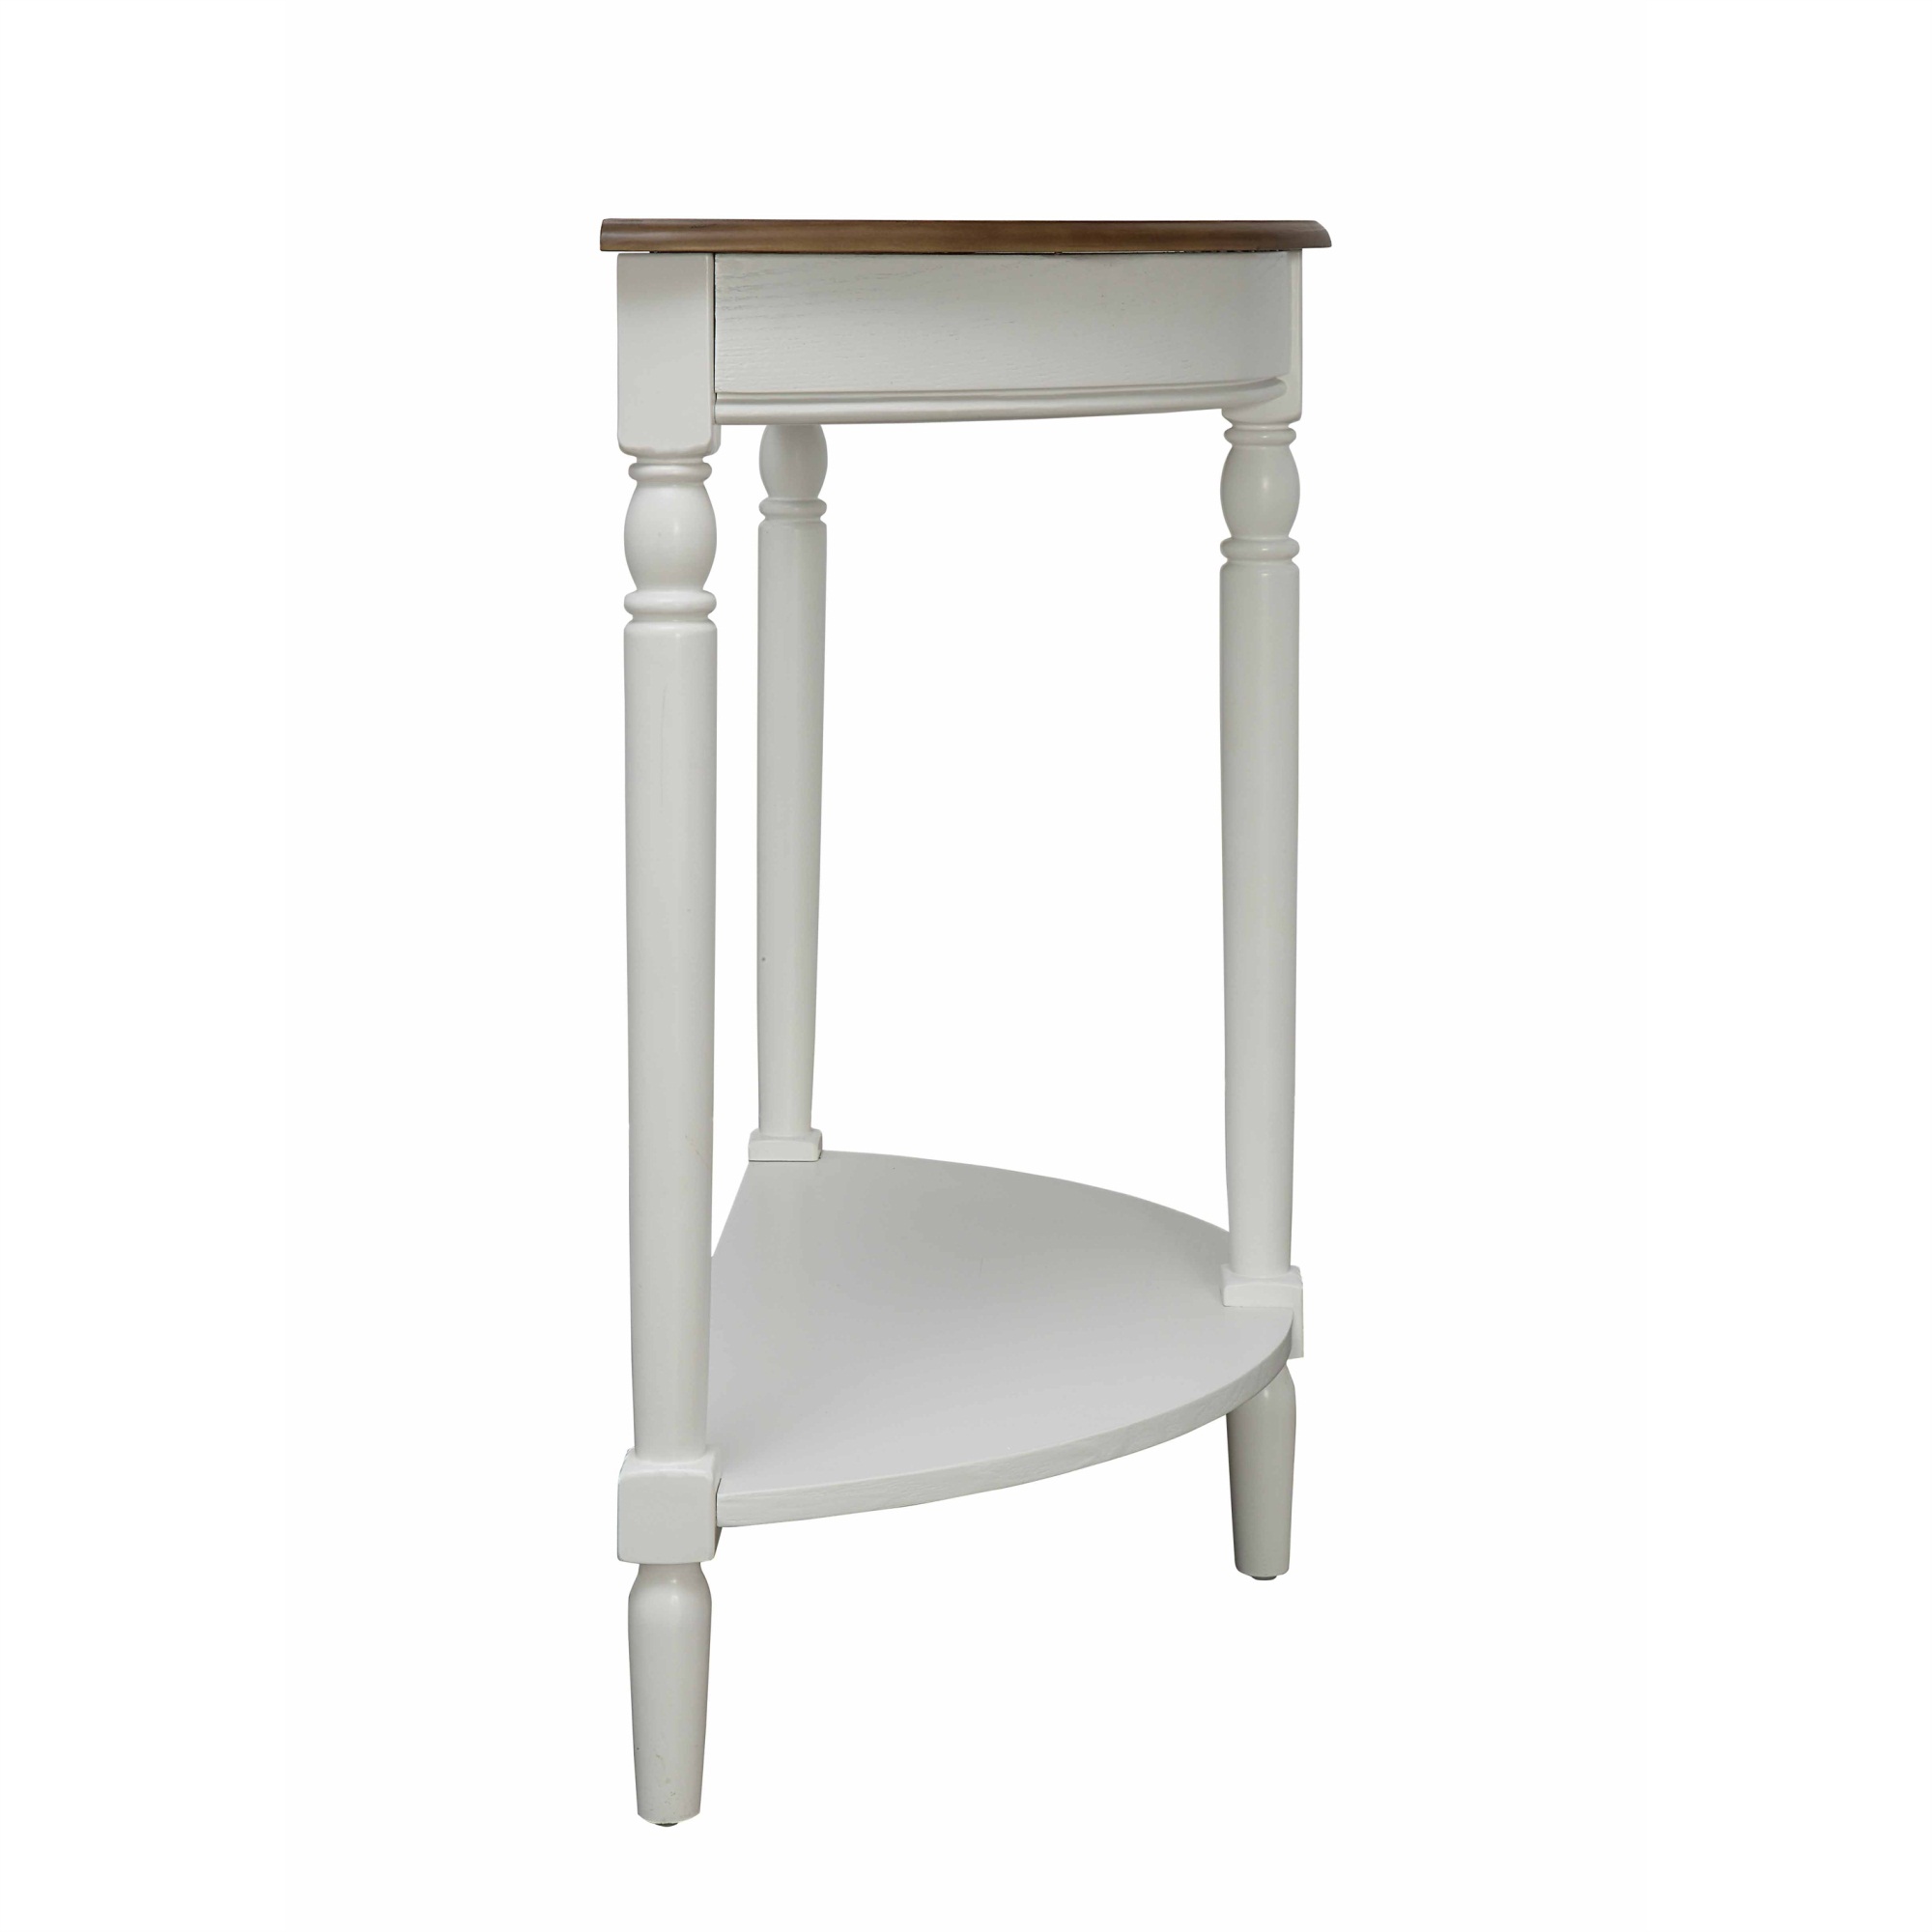 Convenience Concepts French Country Half-Round Entryway Table with Shelf